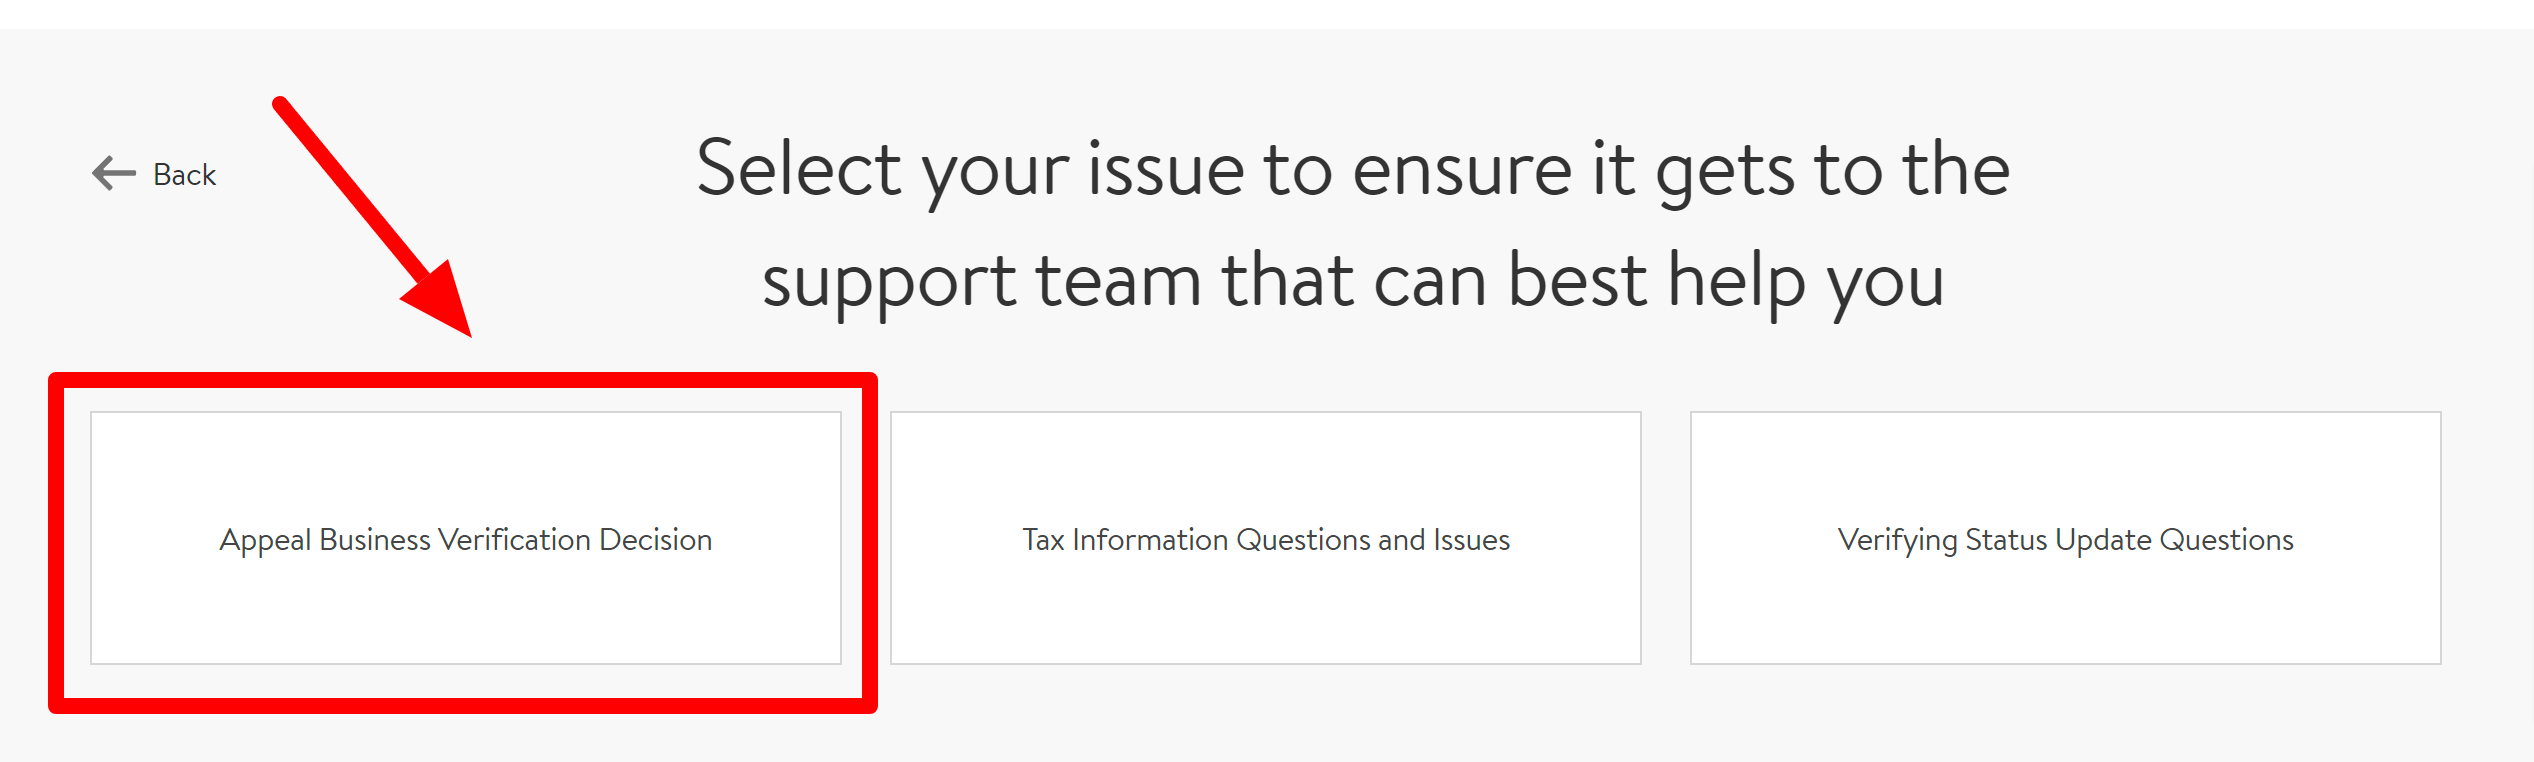 select your issue to ensure it gets to the support team that can best help you- appeal business verification decision